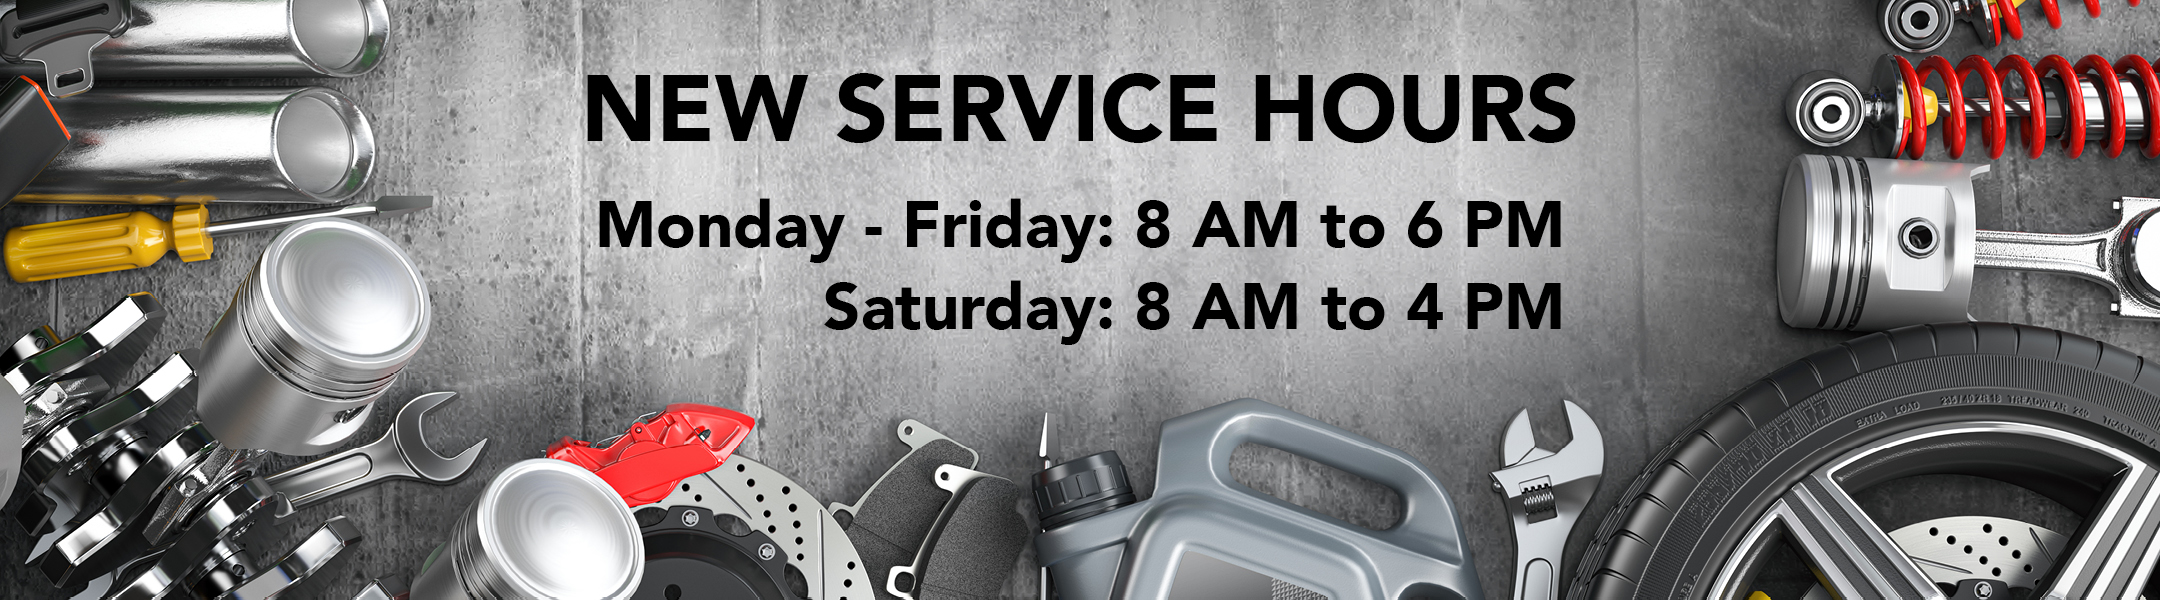 Service Hours at Downtown Ford in Toronto, ON